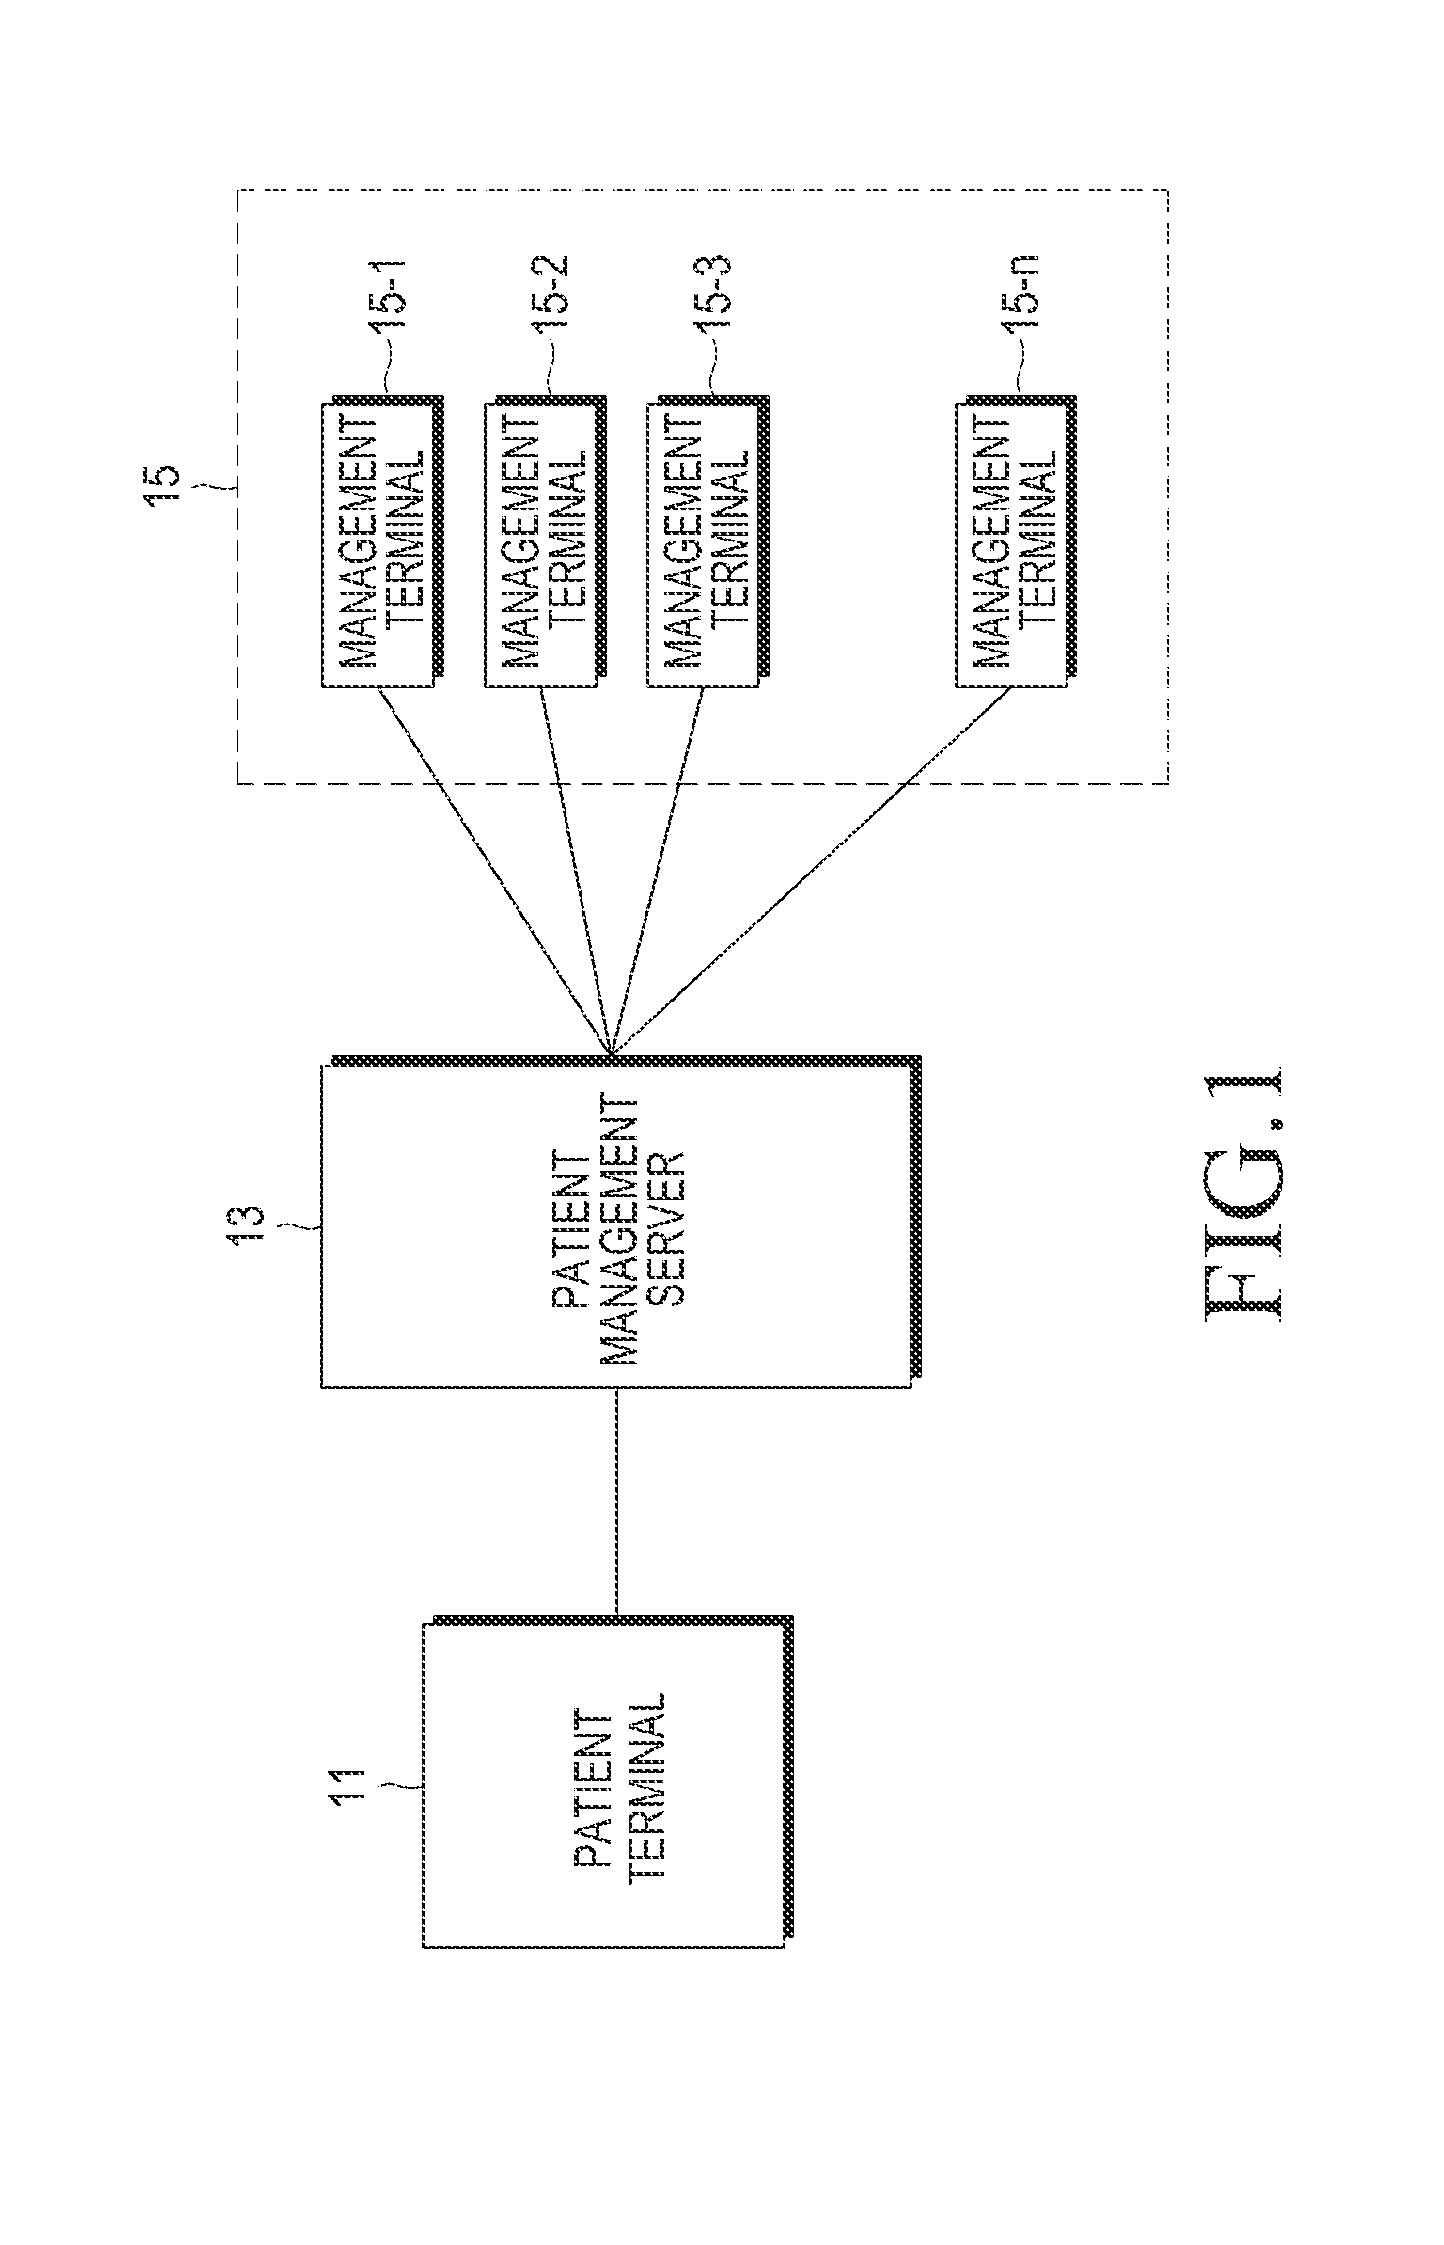 Method and apparatus for managing patients using group communication